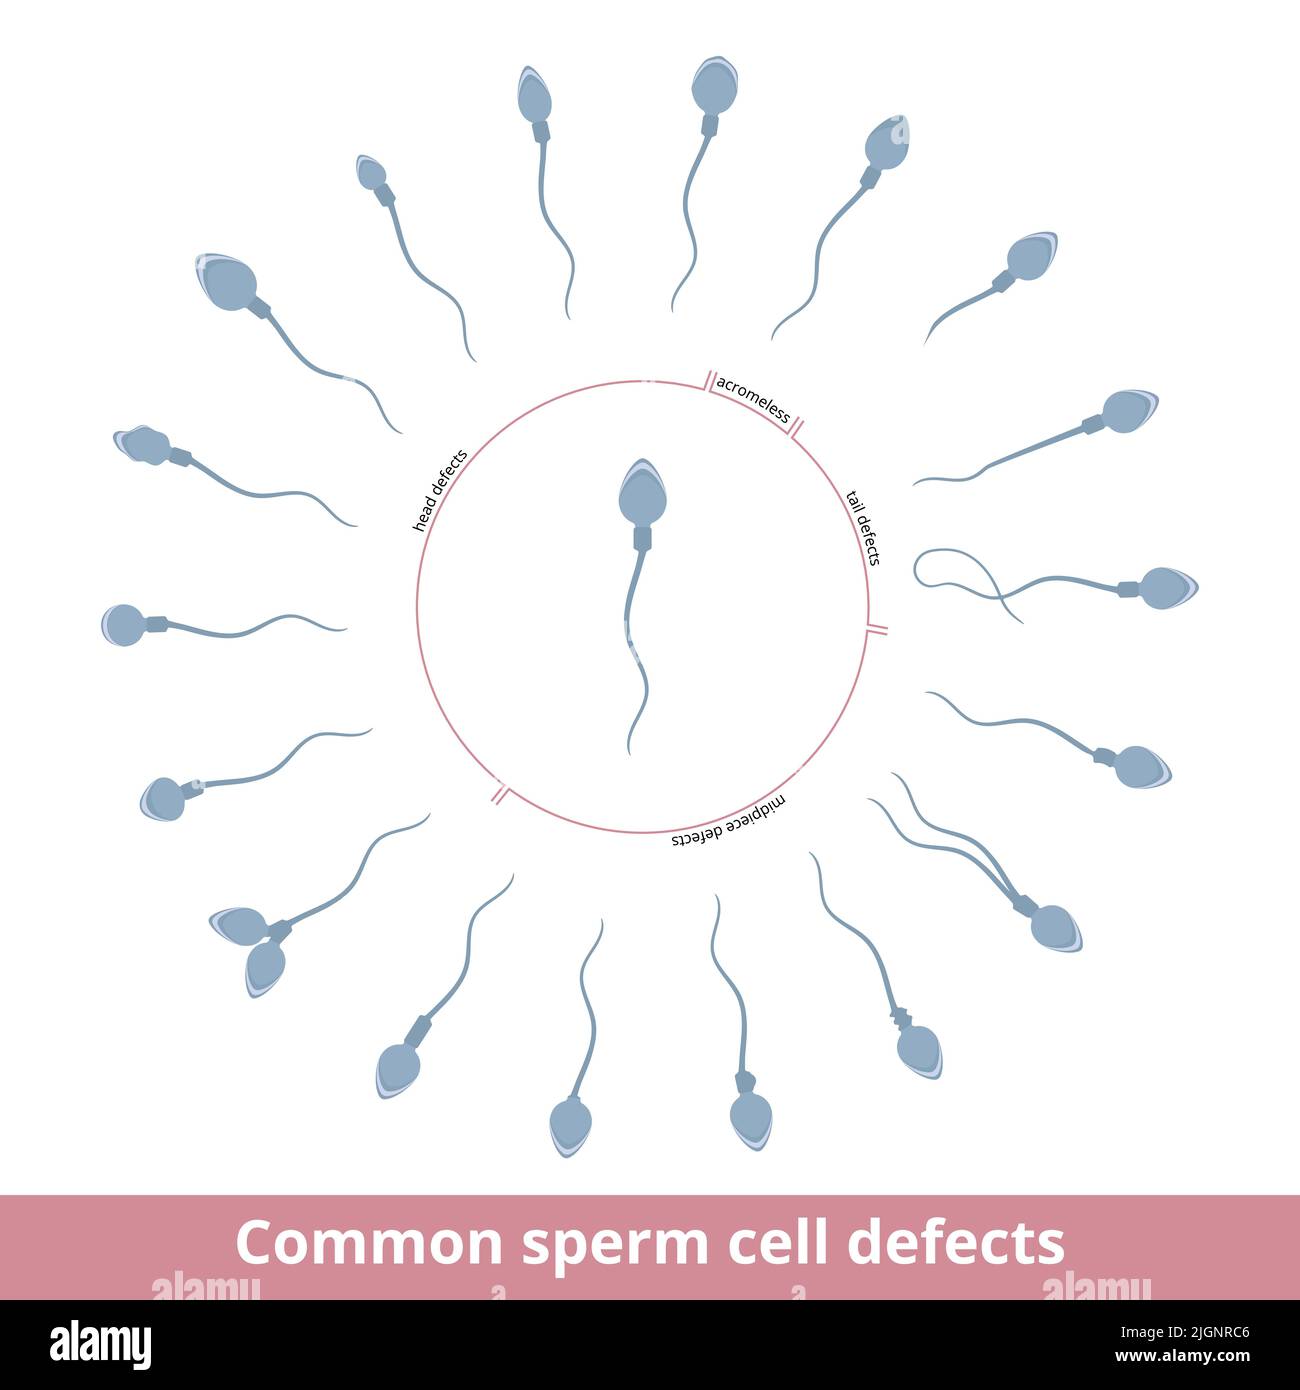 Common sperm cell defects. Visualization of common sperm cell defects, including head, tail, and midpiece pathologies, acromeless defect. Stock Vector